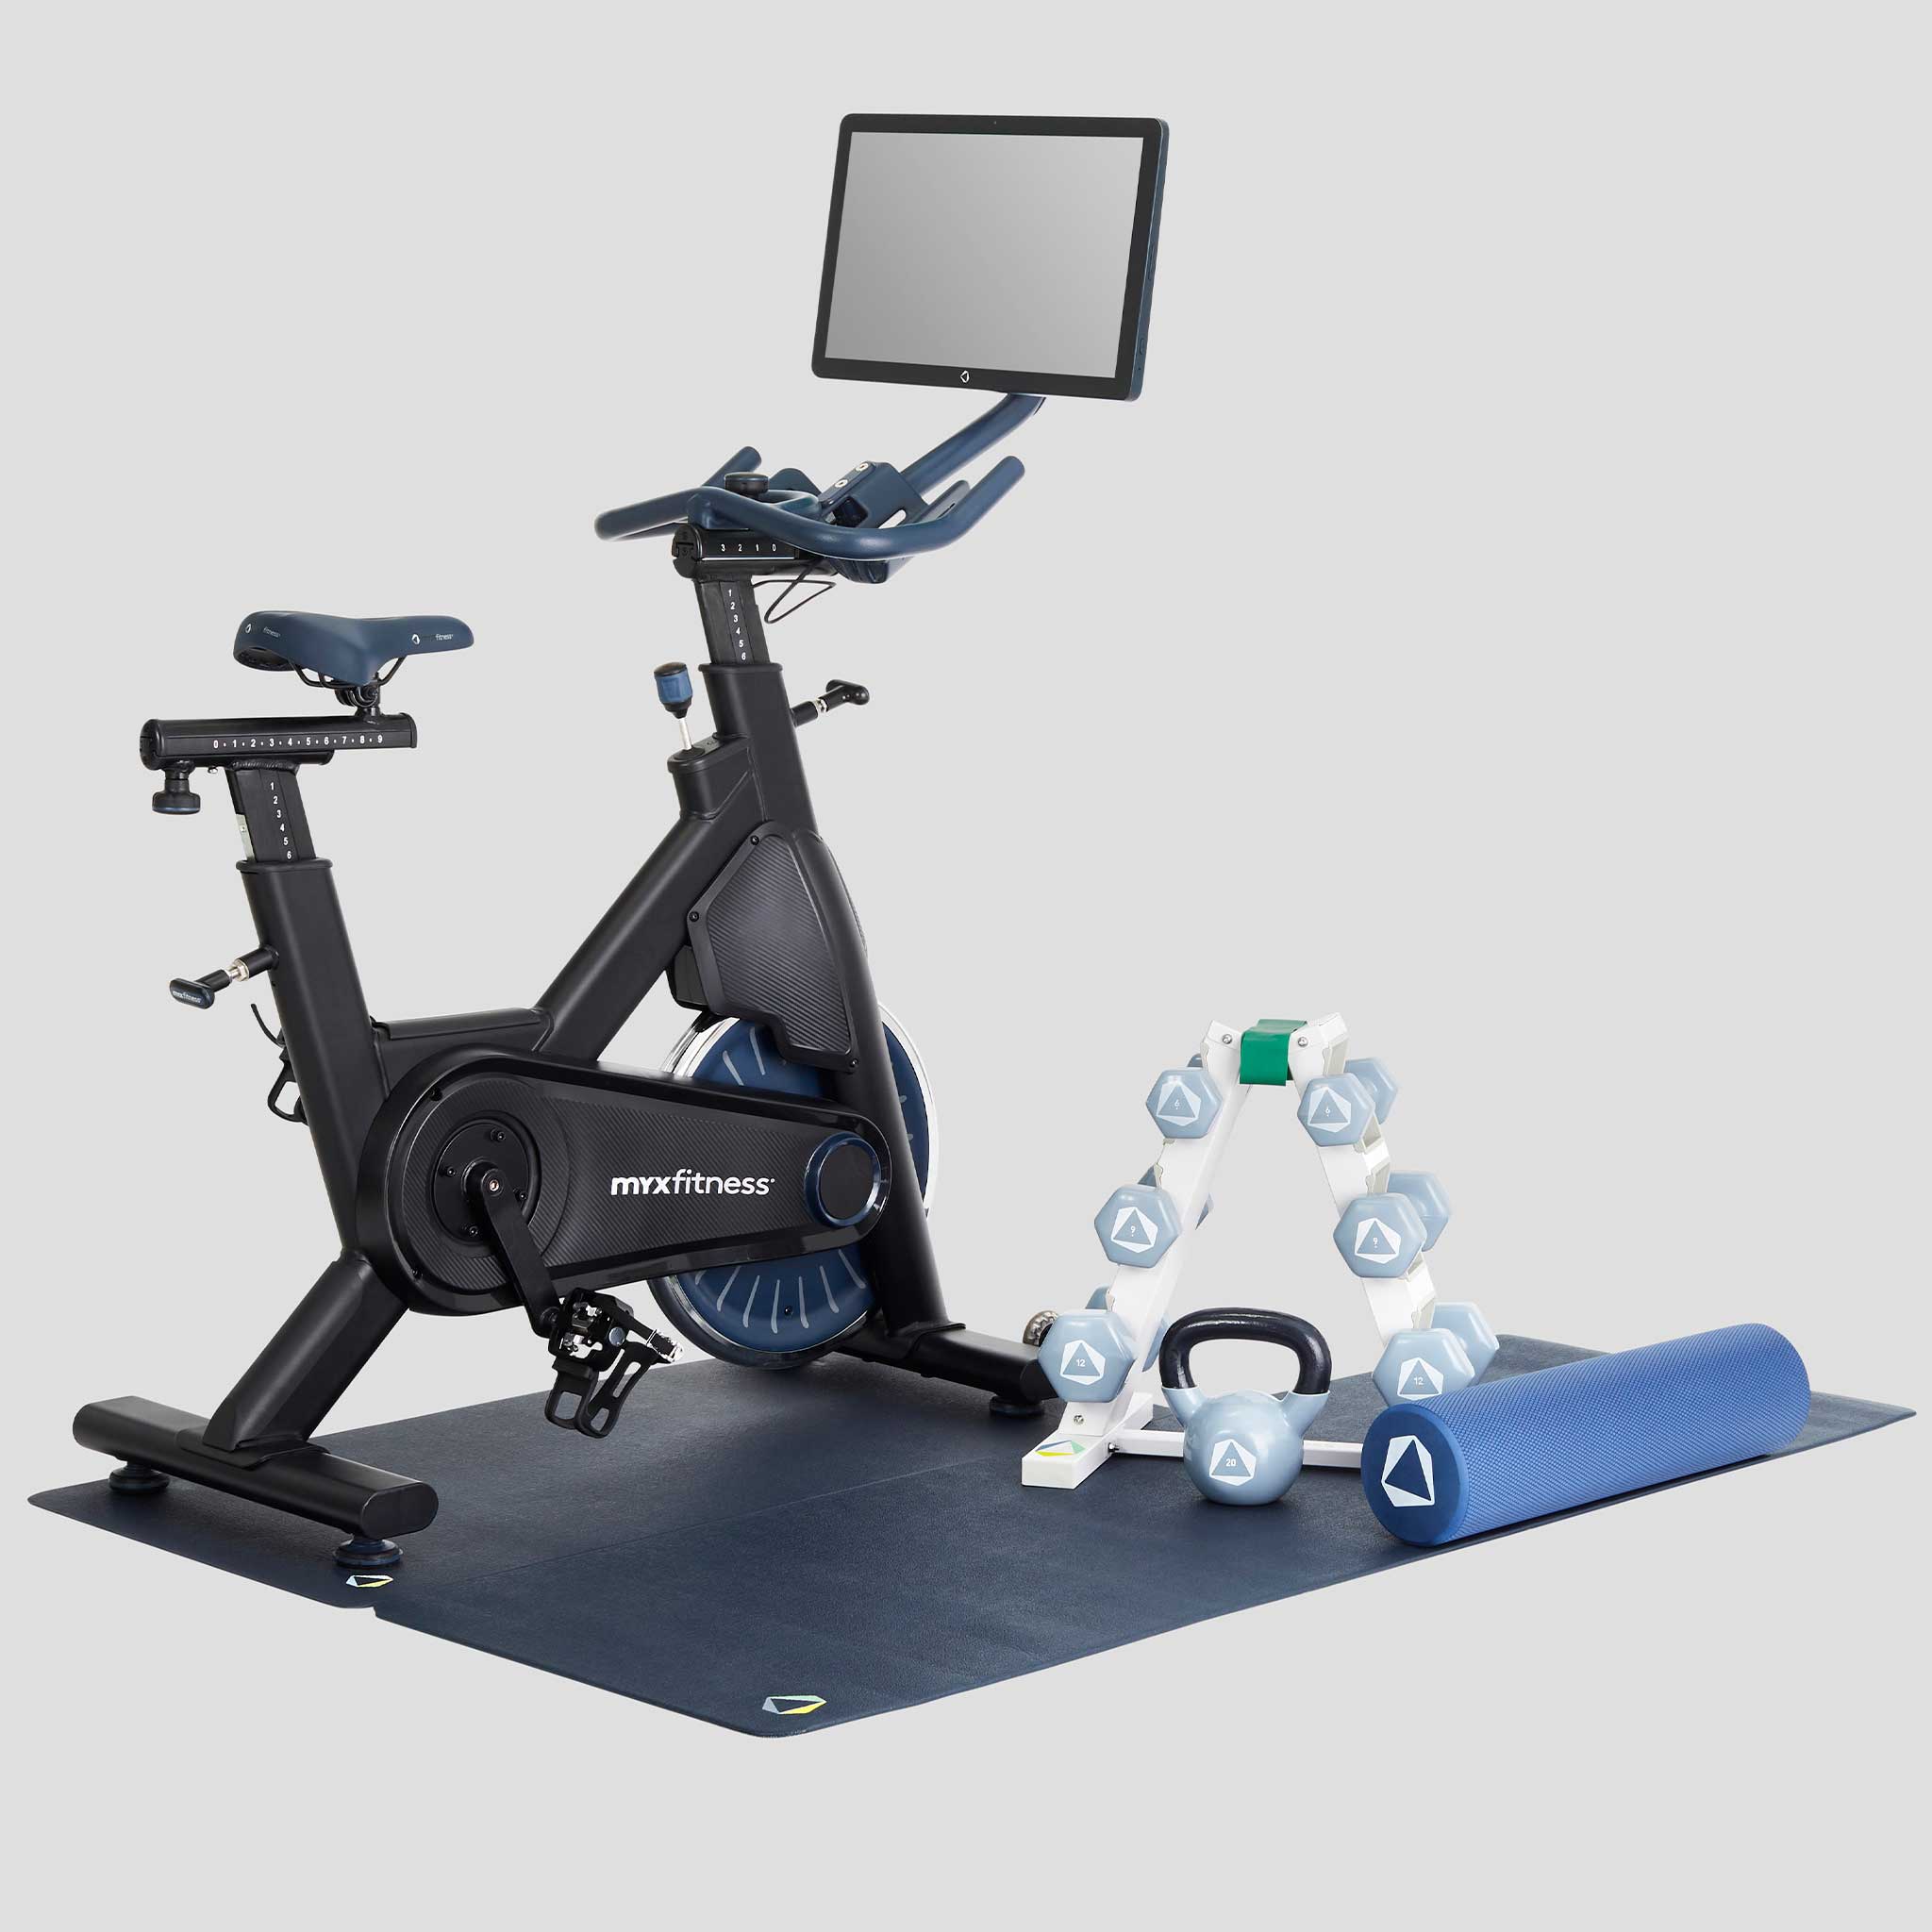 The BODi Bike+ Home Studio in Charcoal black with weight rack, foam roller, spri stretch band, kettlebell and floor mats